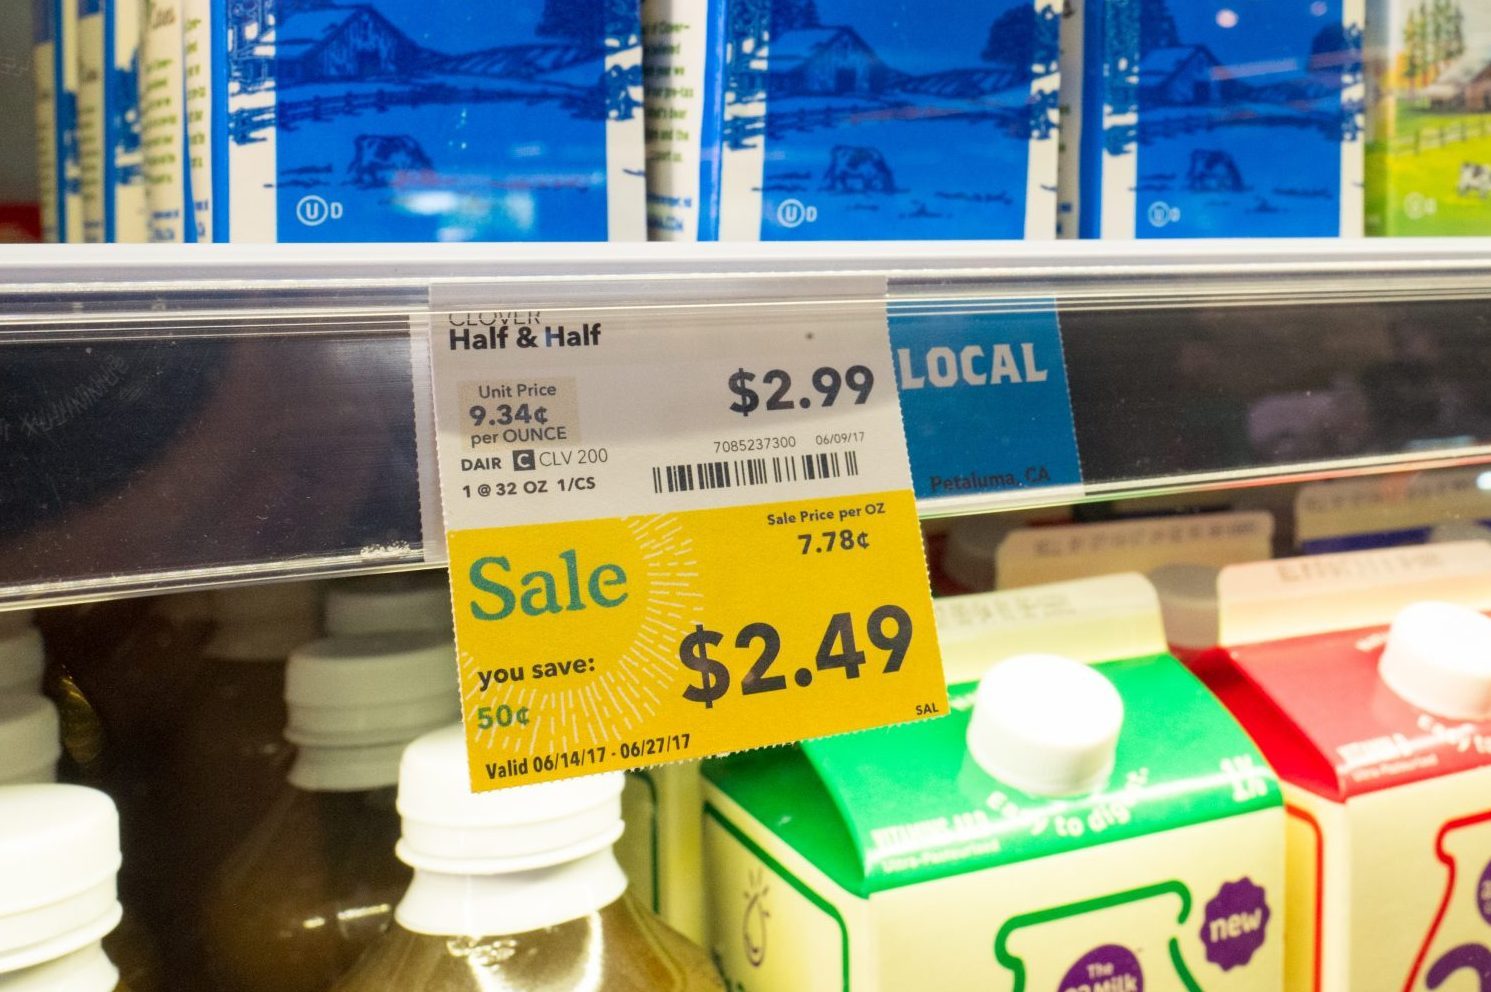 Milk is on display, with a label reading "Sale", at Whole Foods Market grocery store in Dublin, California